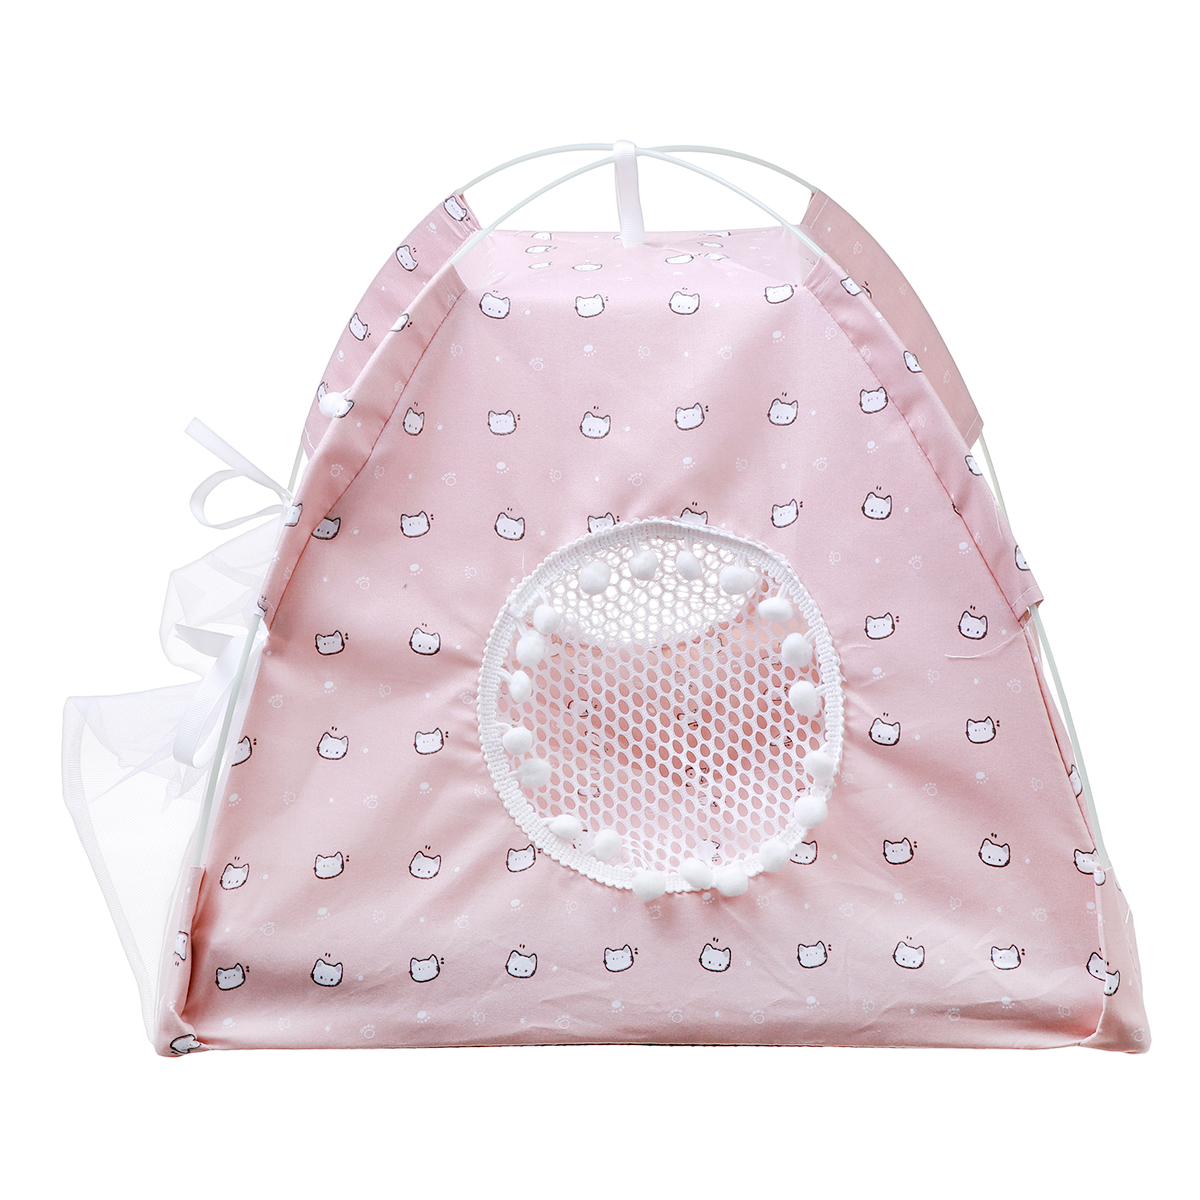 Pet-Tent-Cat-Bed-Puppy-House-Cushion-Pad-Bed-Flamingo-Pattern-Indo-1825833-8